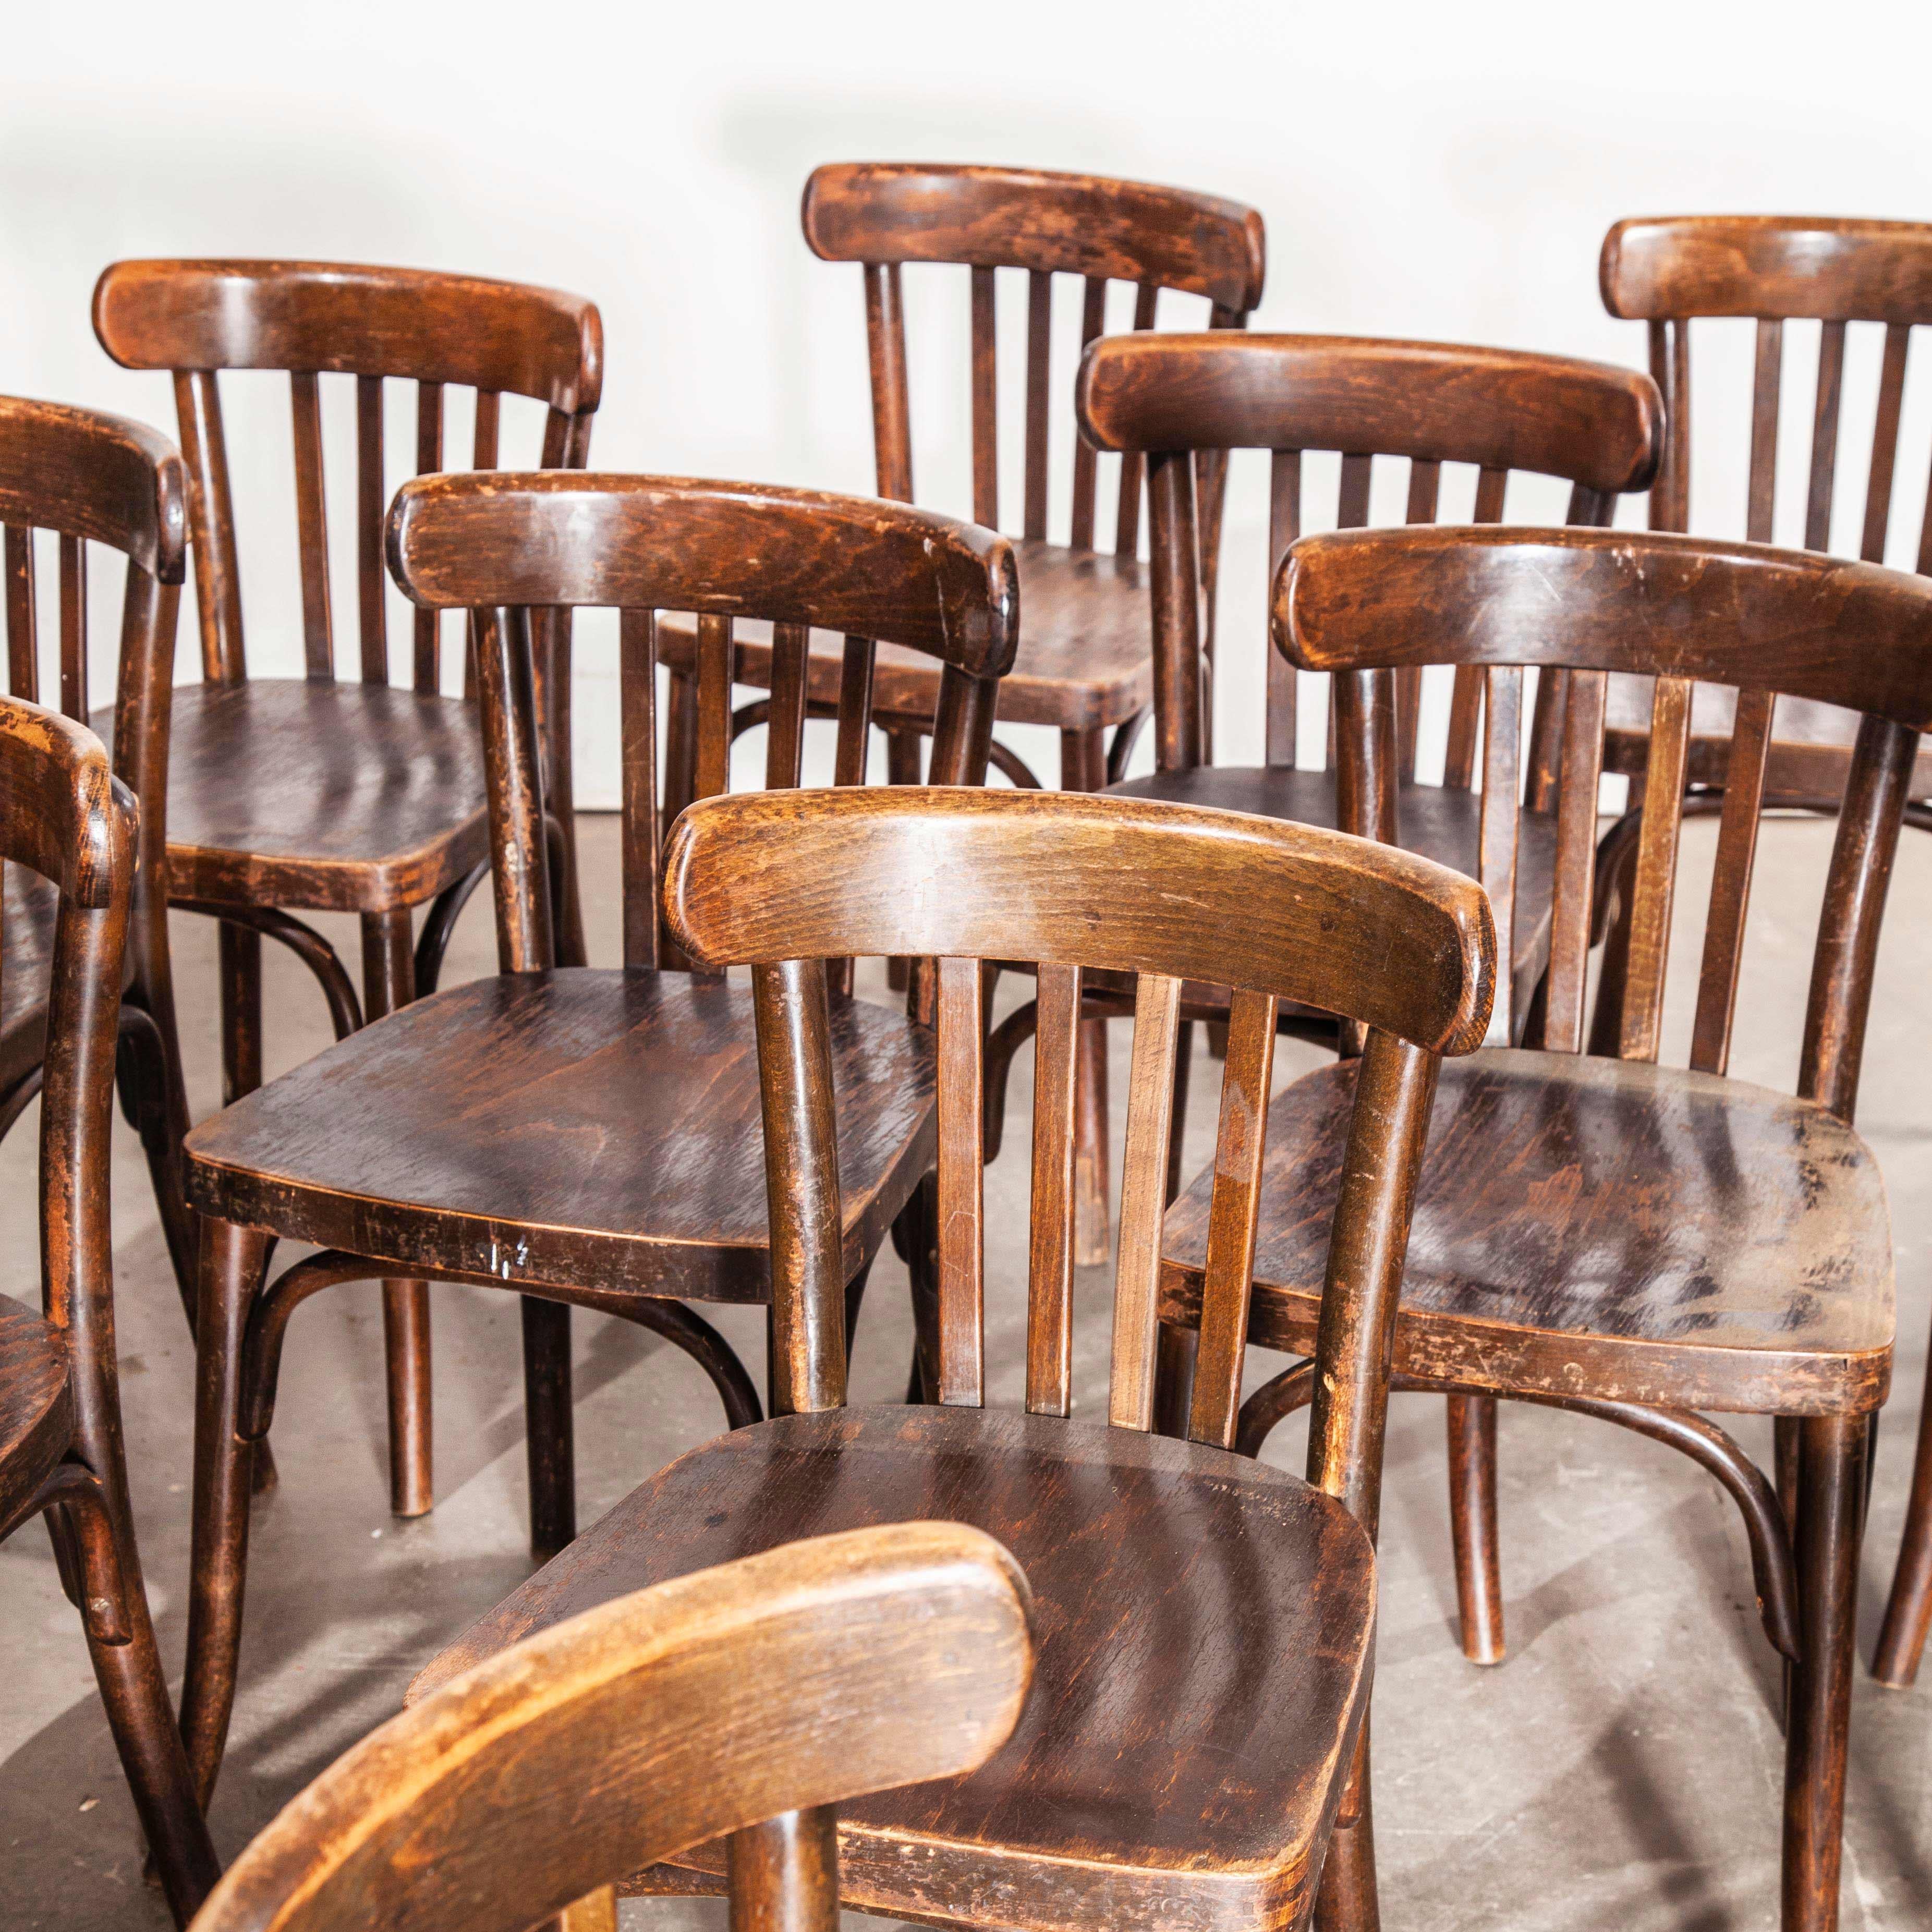 1930s original marked Thonet bentwood dining chairs. dark stained beech, various quantities available
1930s original marked Thonet bentwood dining chairs. dark stained beech, various quantities available. These chairs are one of our favourite finds